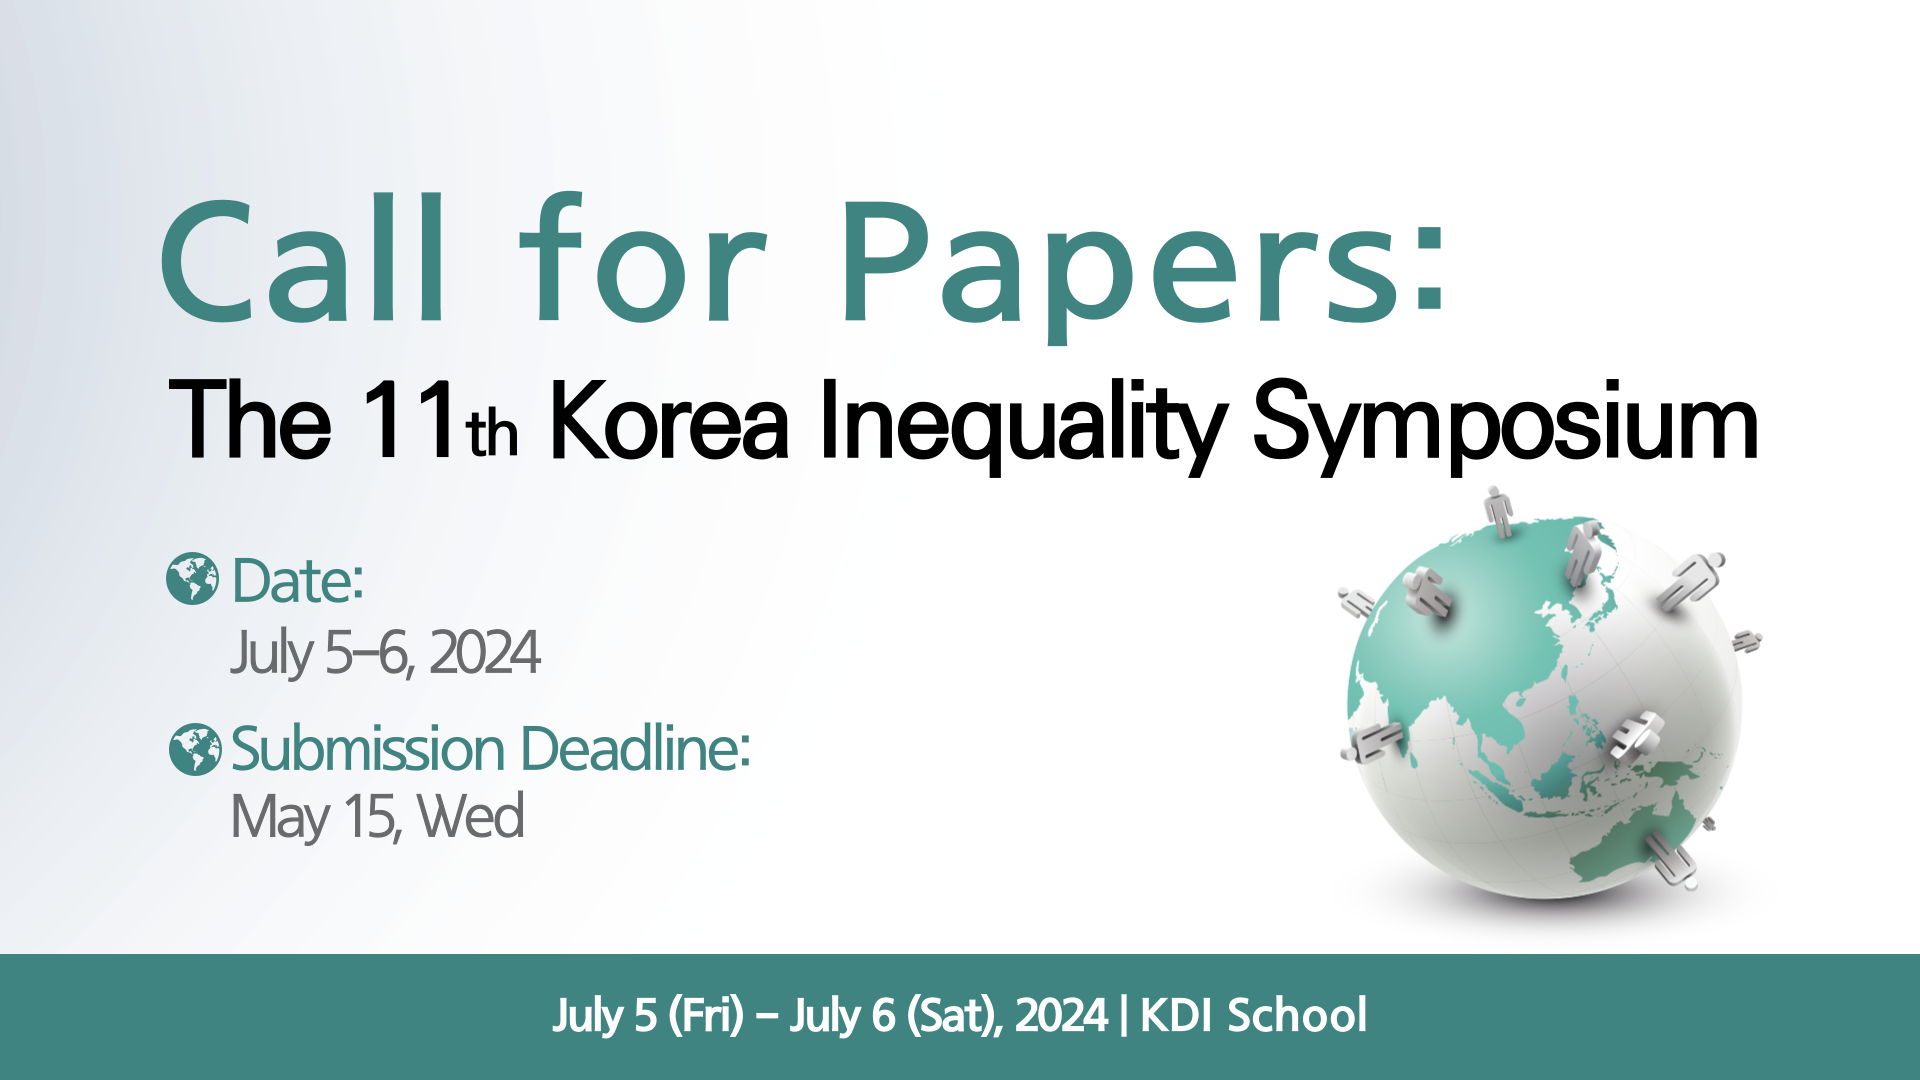 Call for Papers: The 11th Korean Inequality Symposium (July 5-6, 2024)